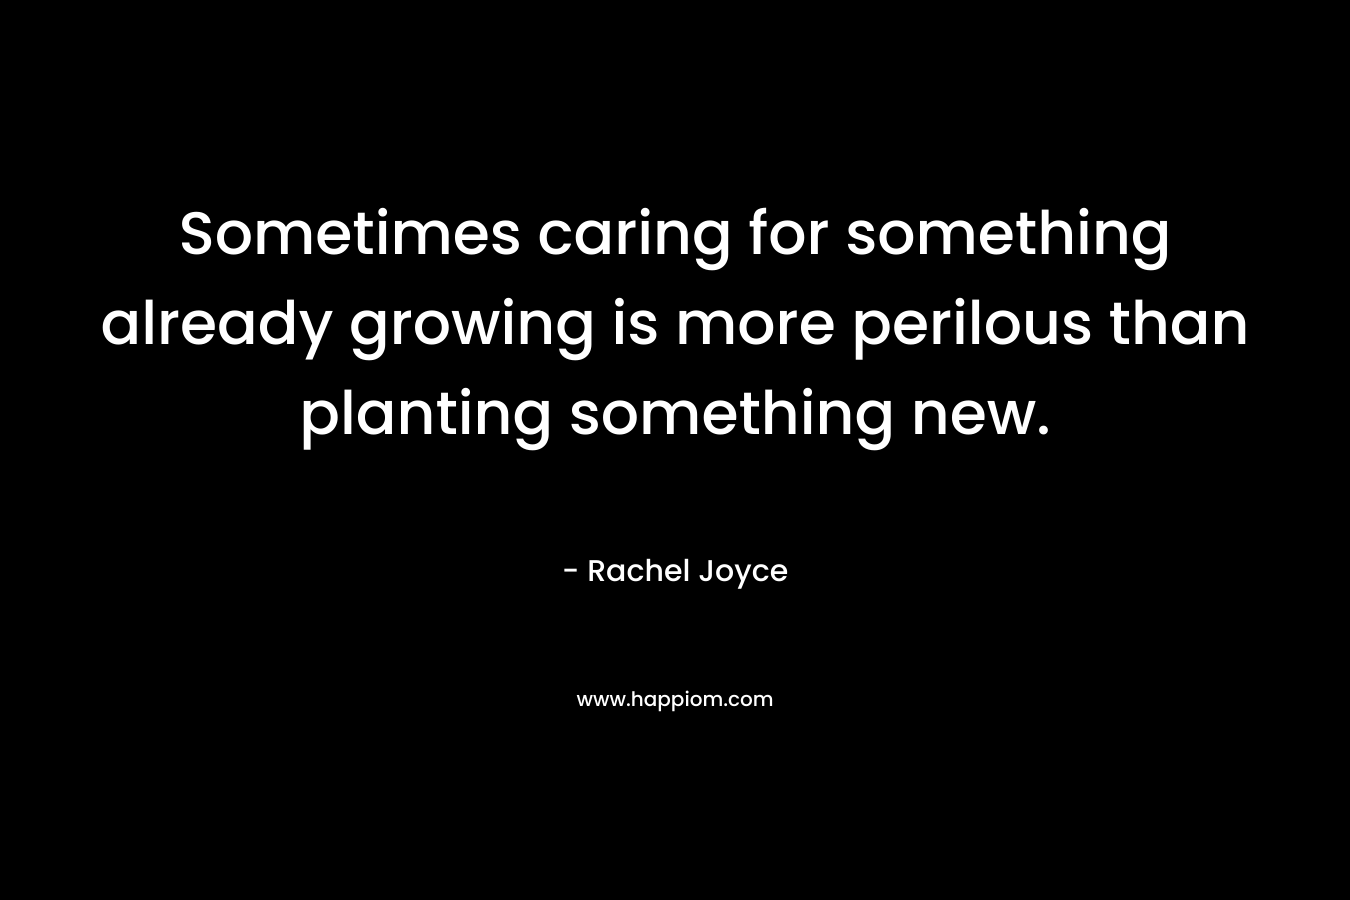 Sometimes caring for something already growing is more perilous than planting something new.